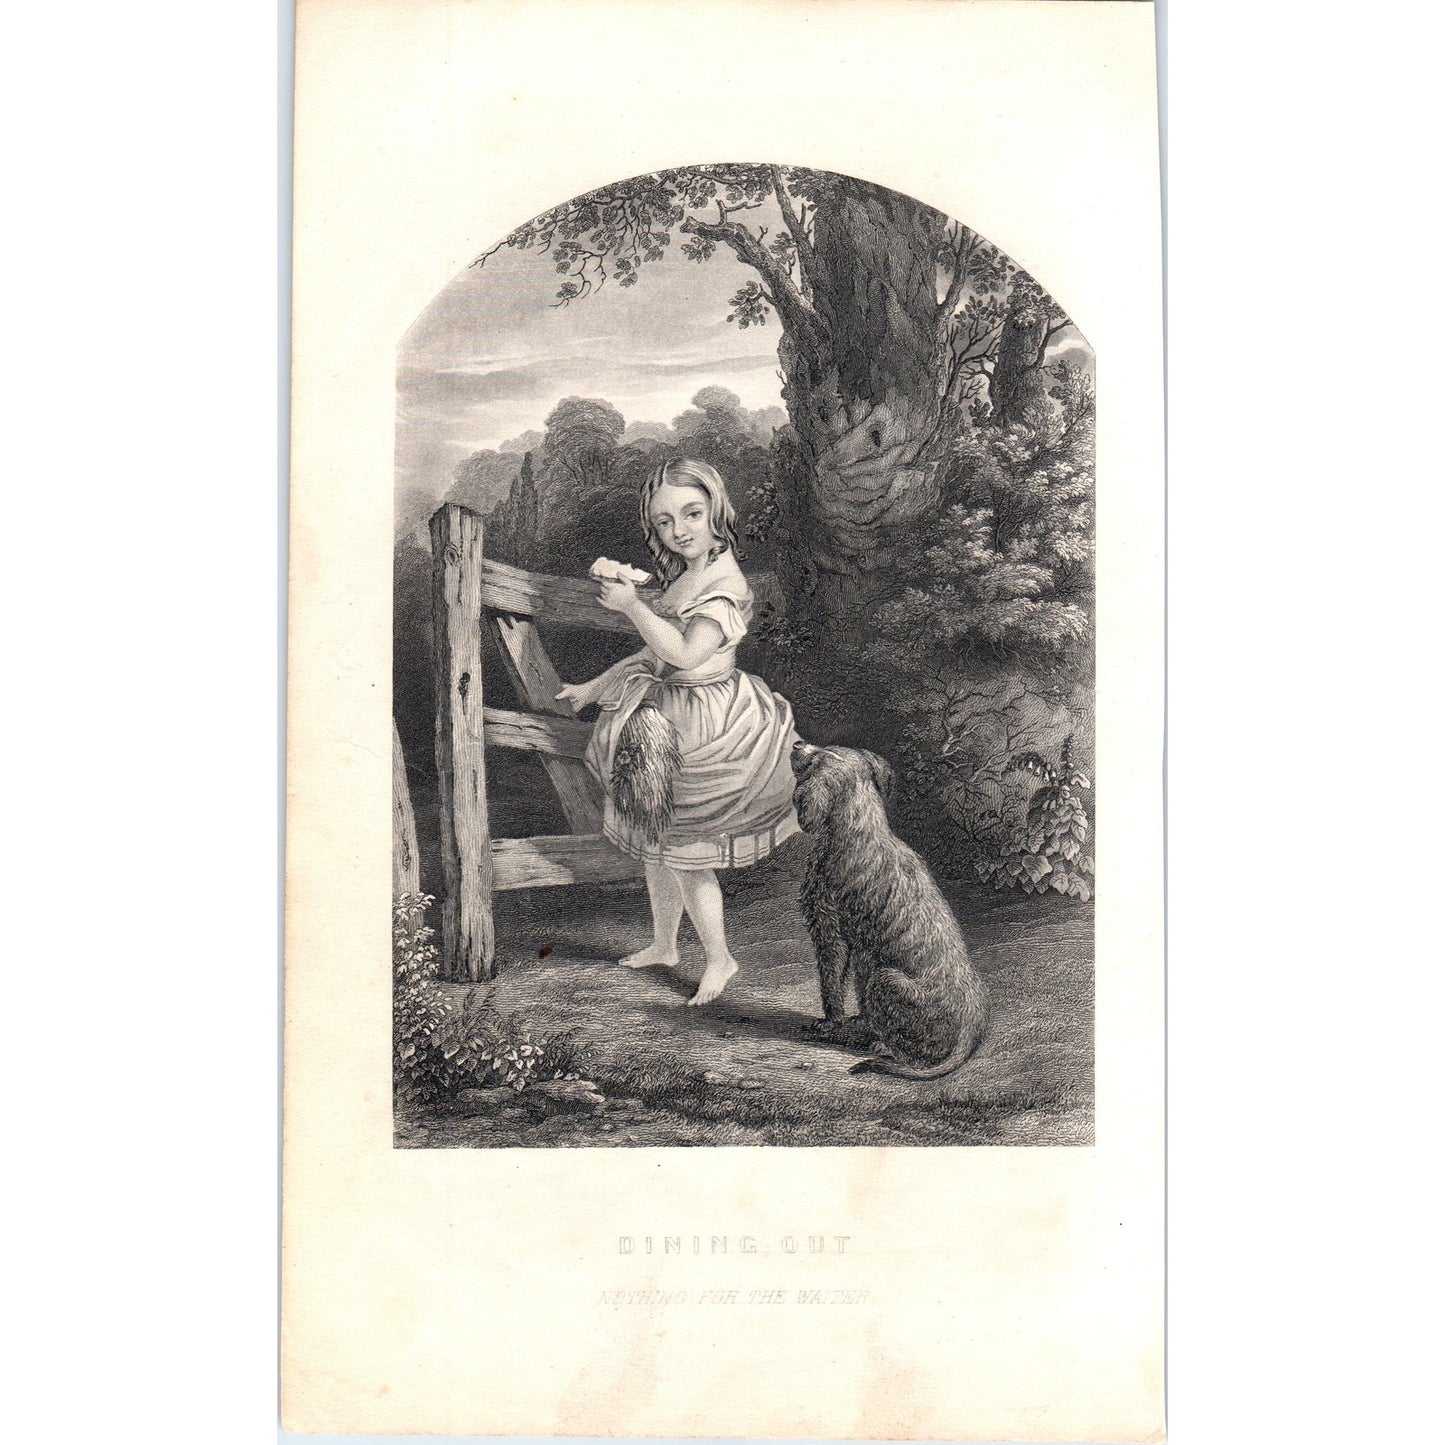 Dining Out - Nothing For The Waiter Girl & Dog 1857 Original Art Engraving D19-4